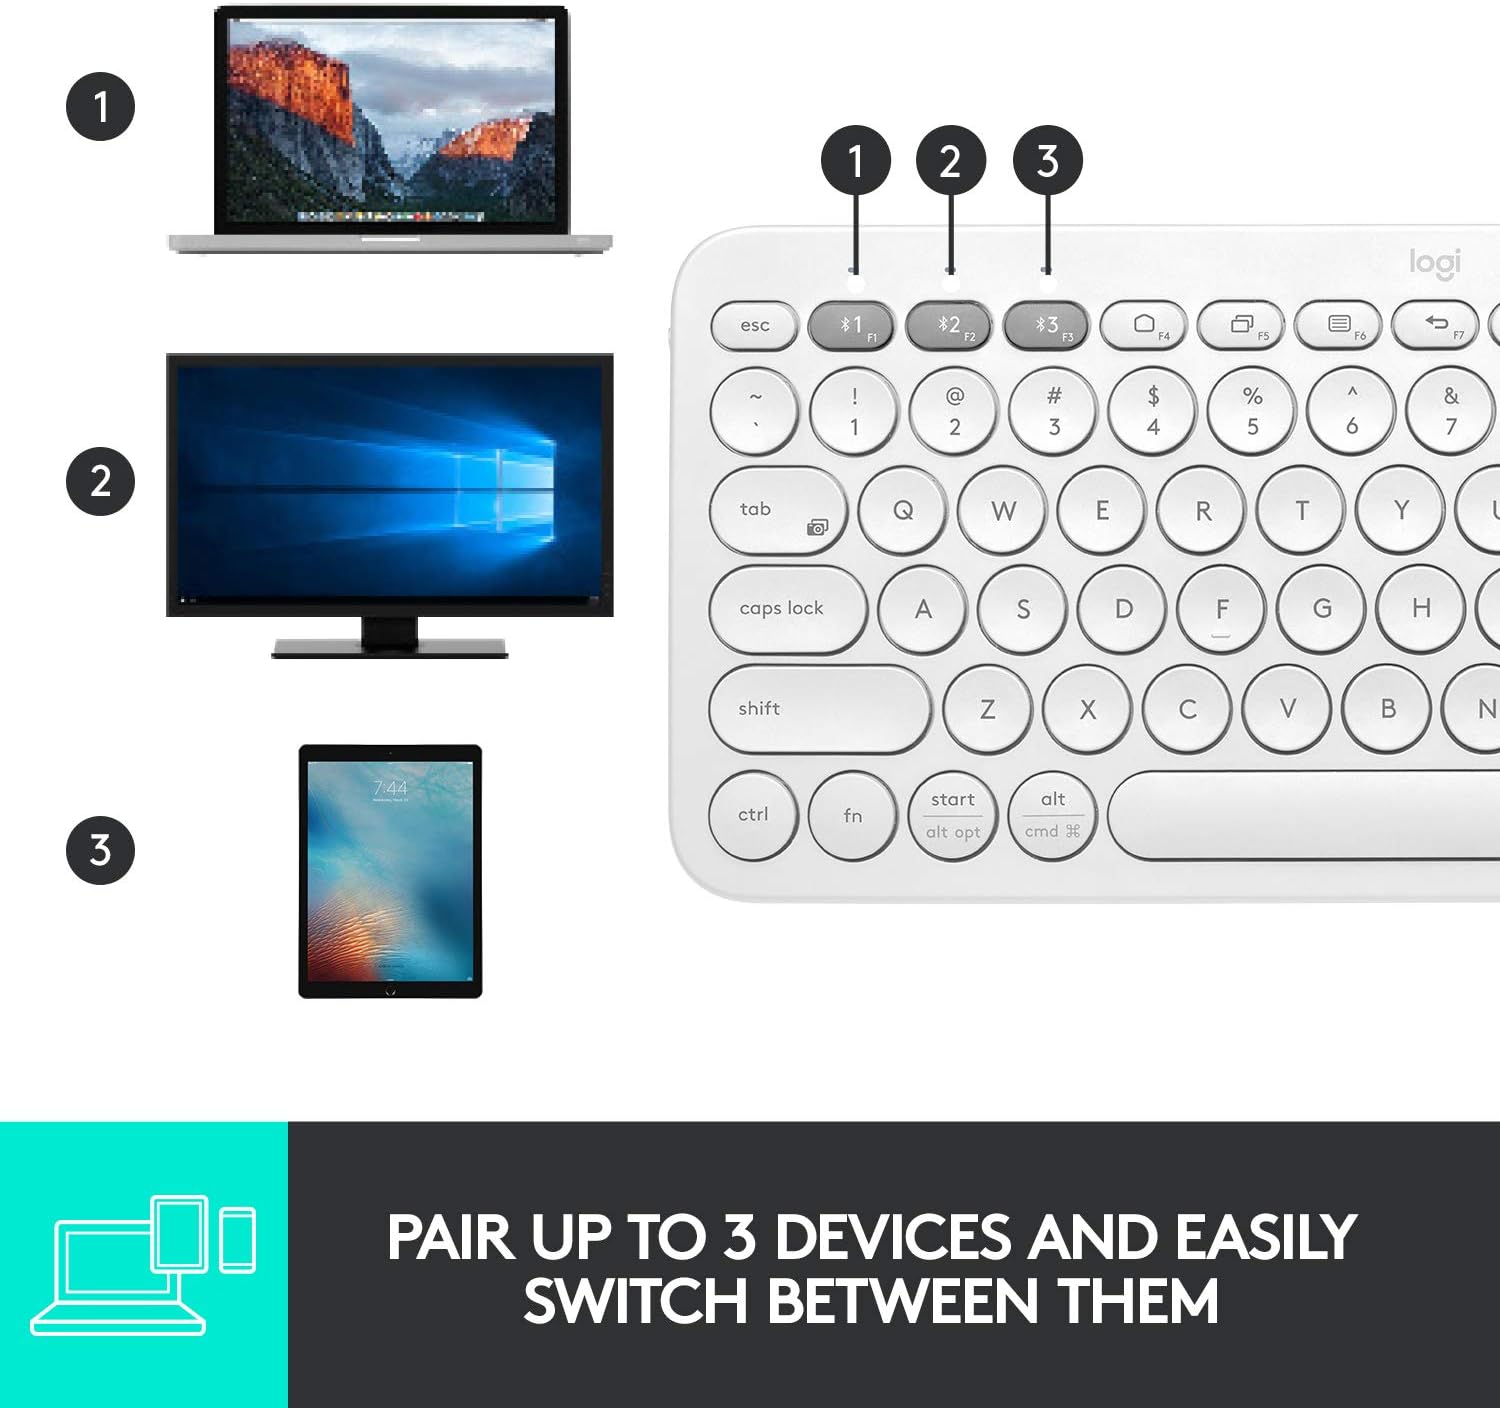 Logitech K380 Multi-Device Bluetooth Wireless Keyboard with Easy-Switch for Up to 3 Devices - White